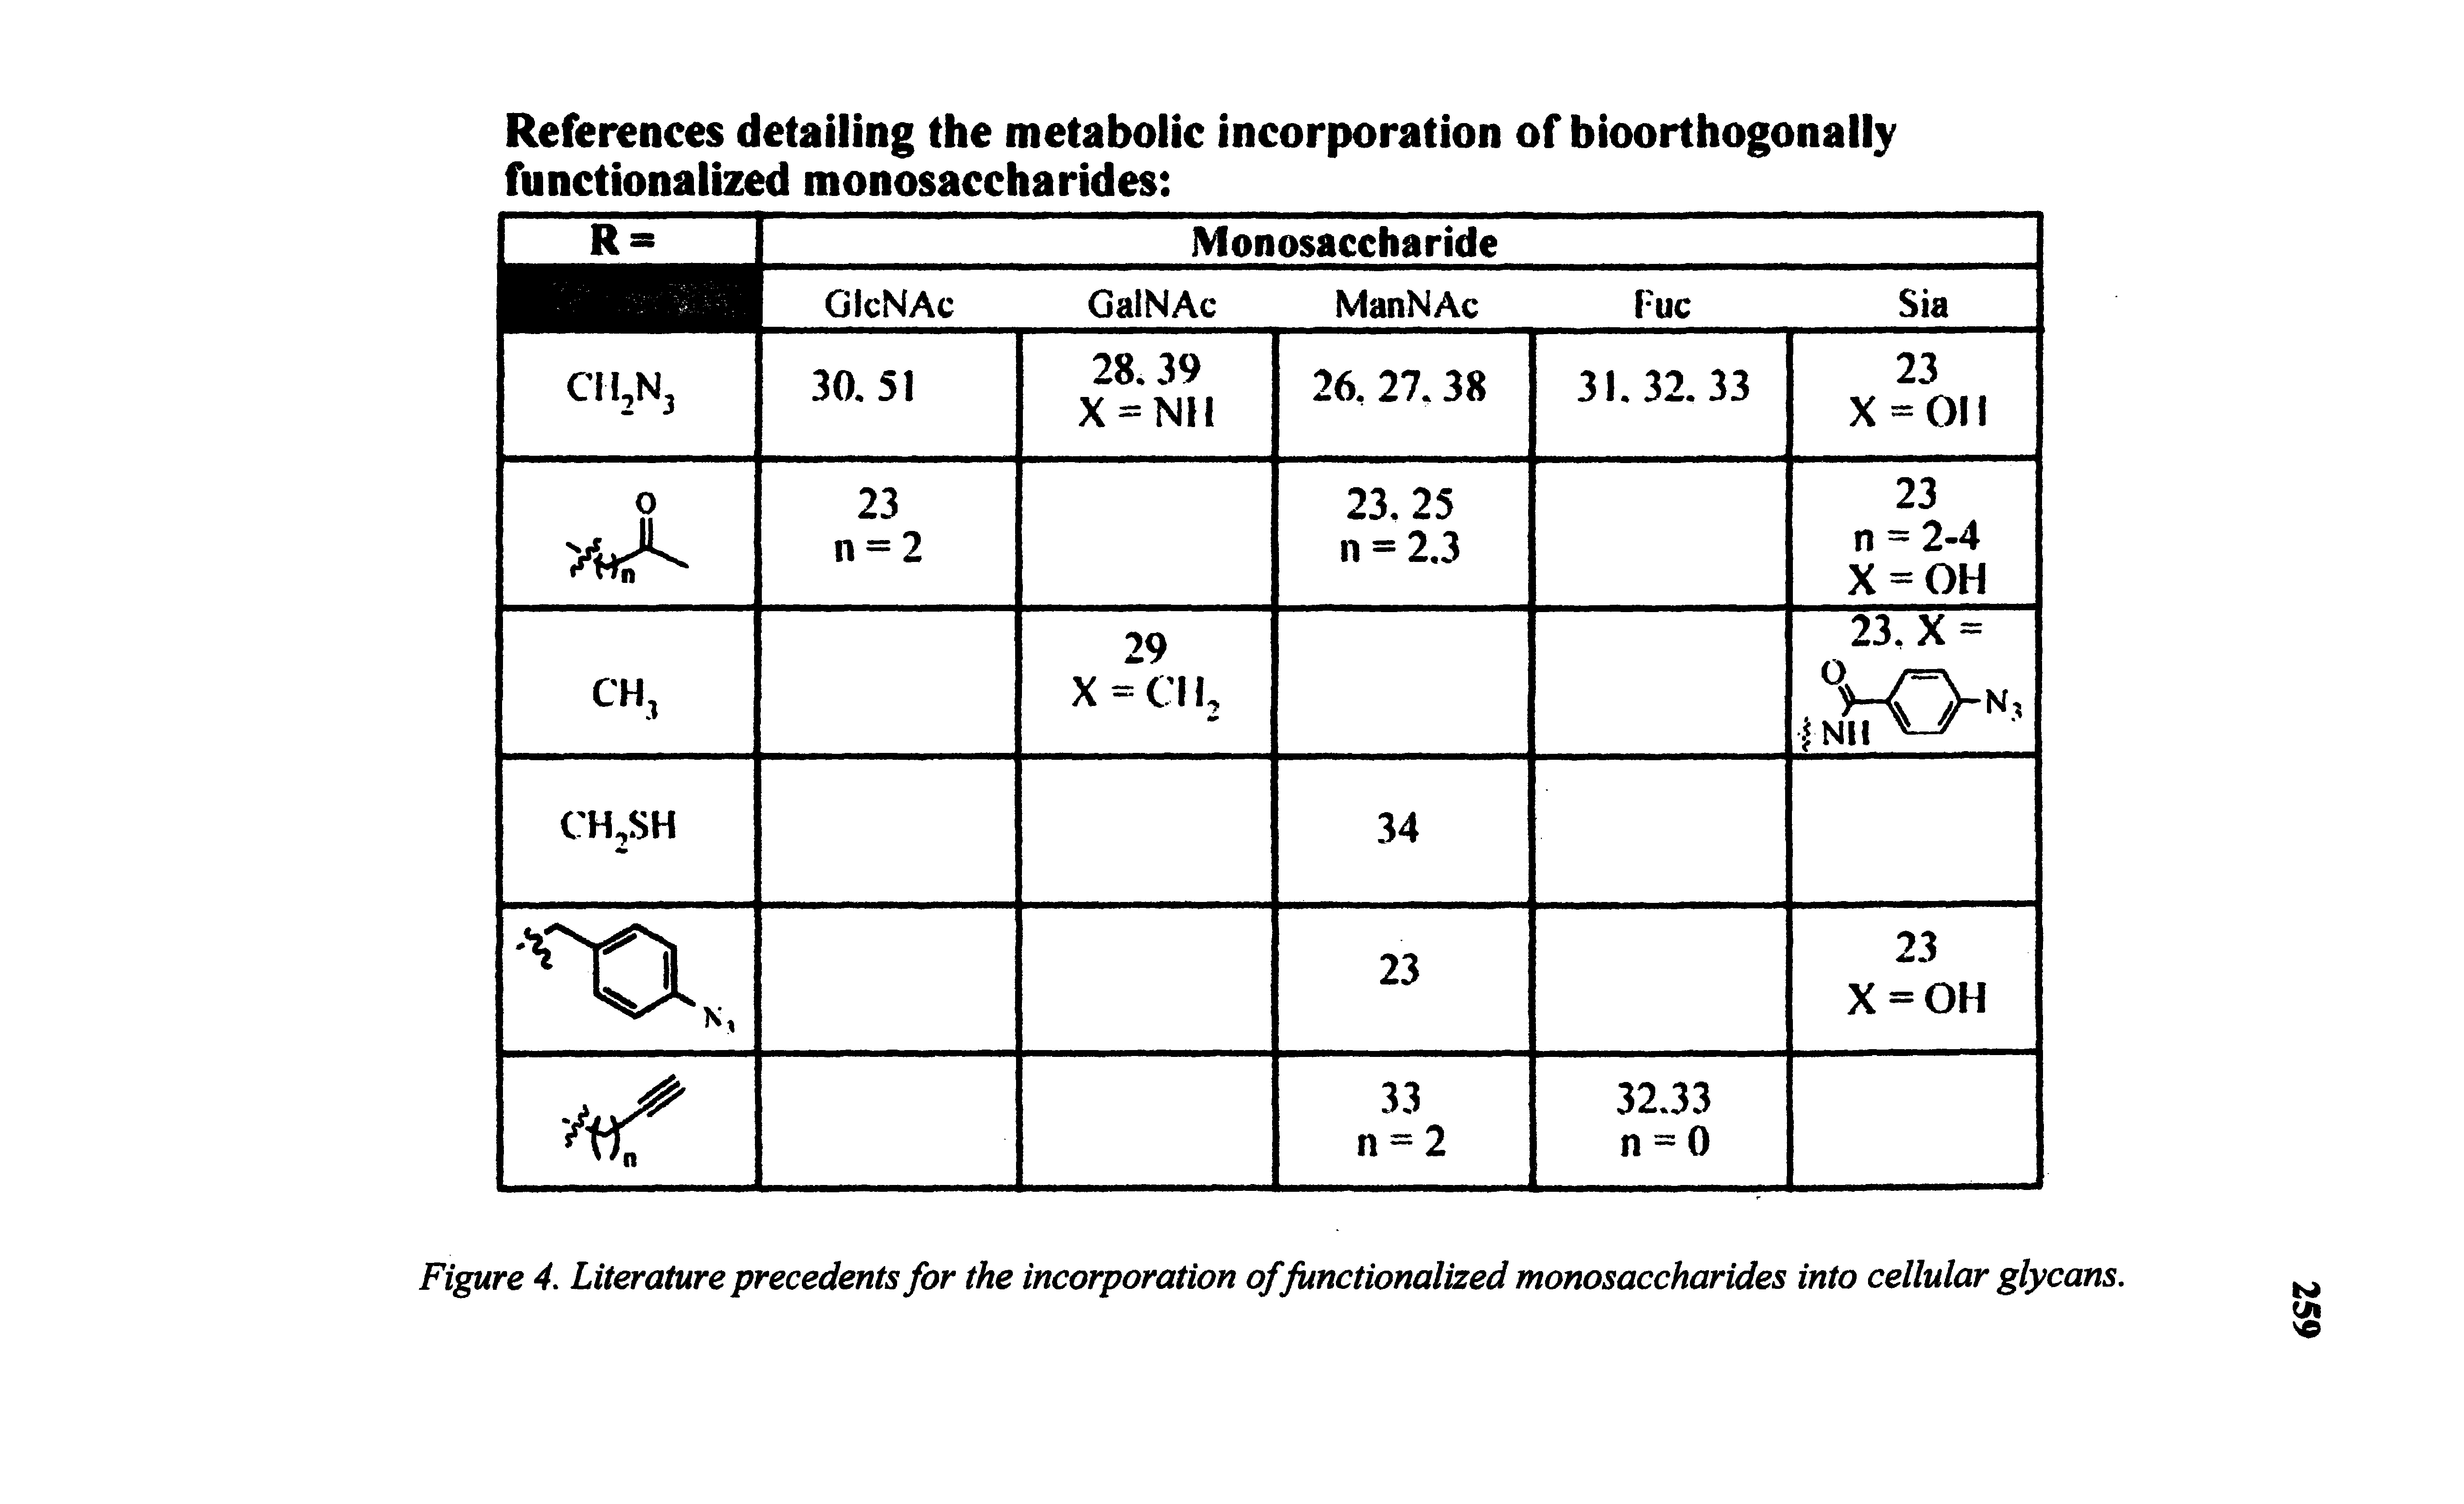 Figure 4. Literature precedents for the incorporation of functionalized monosaccharides into cellular glycans.